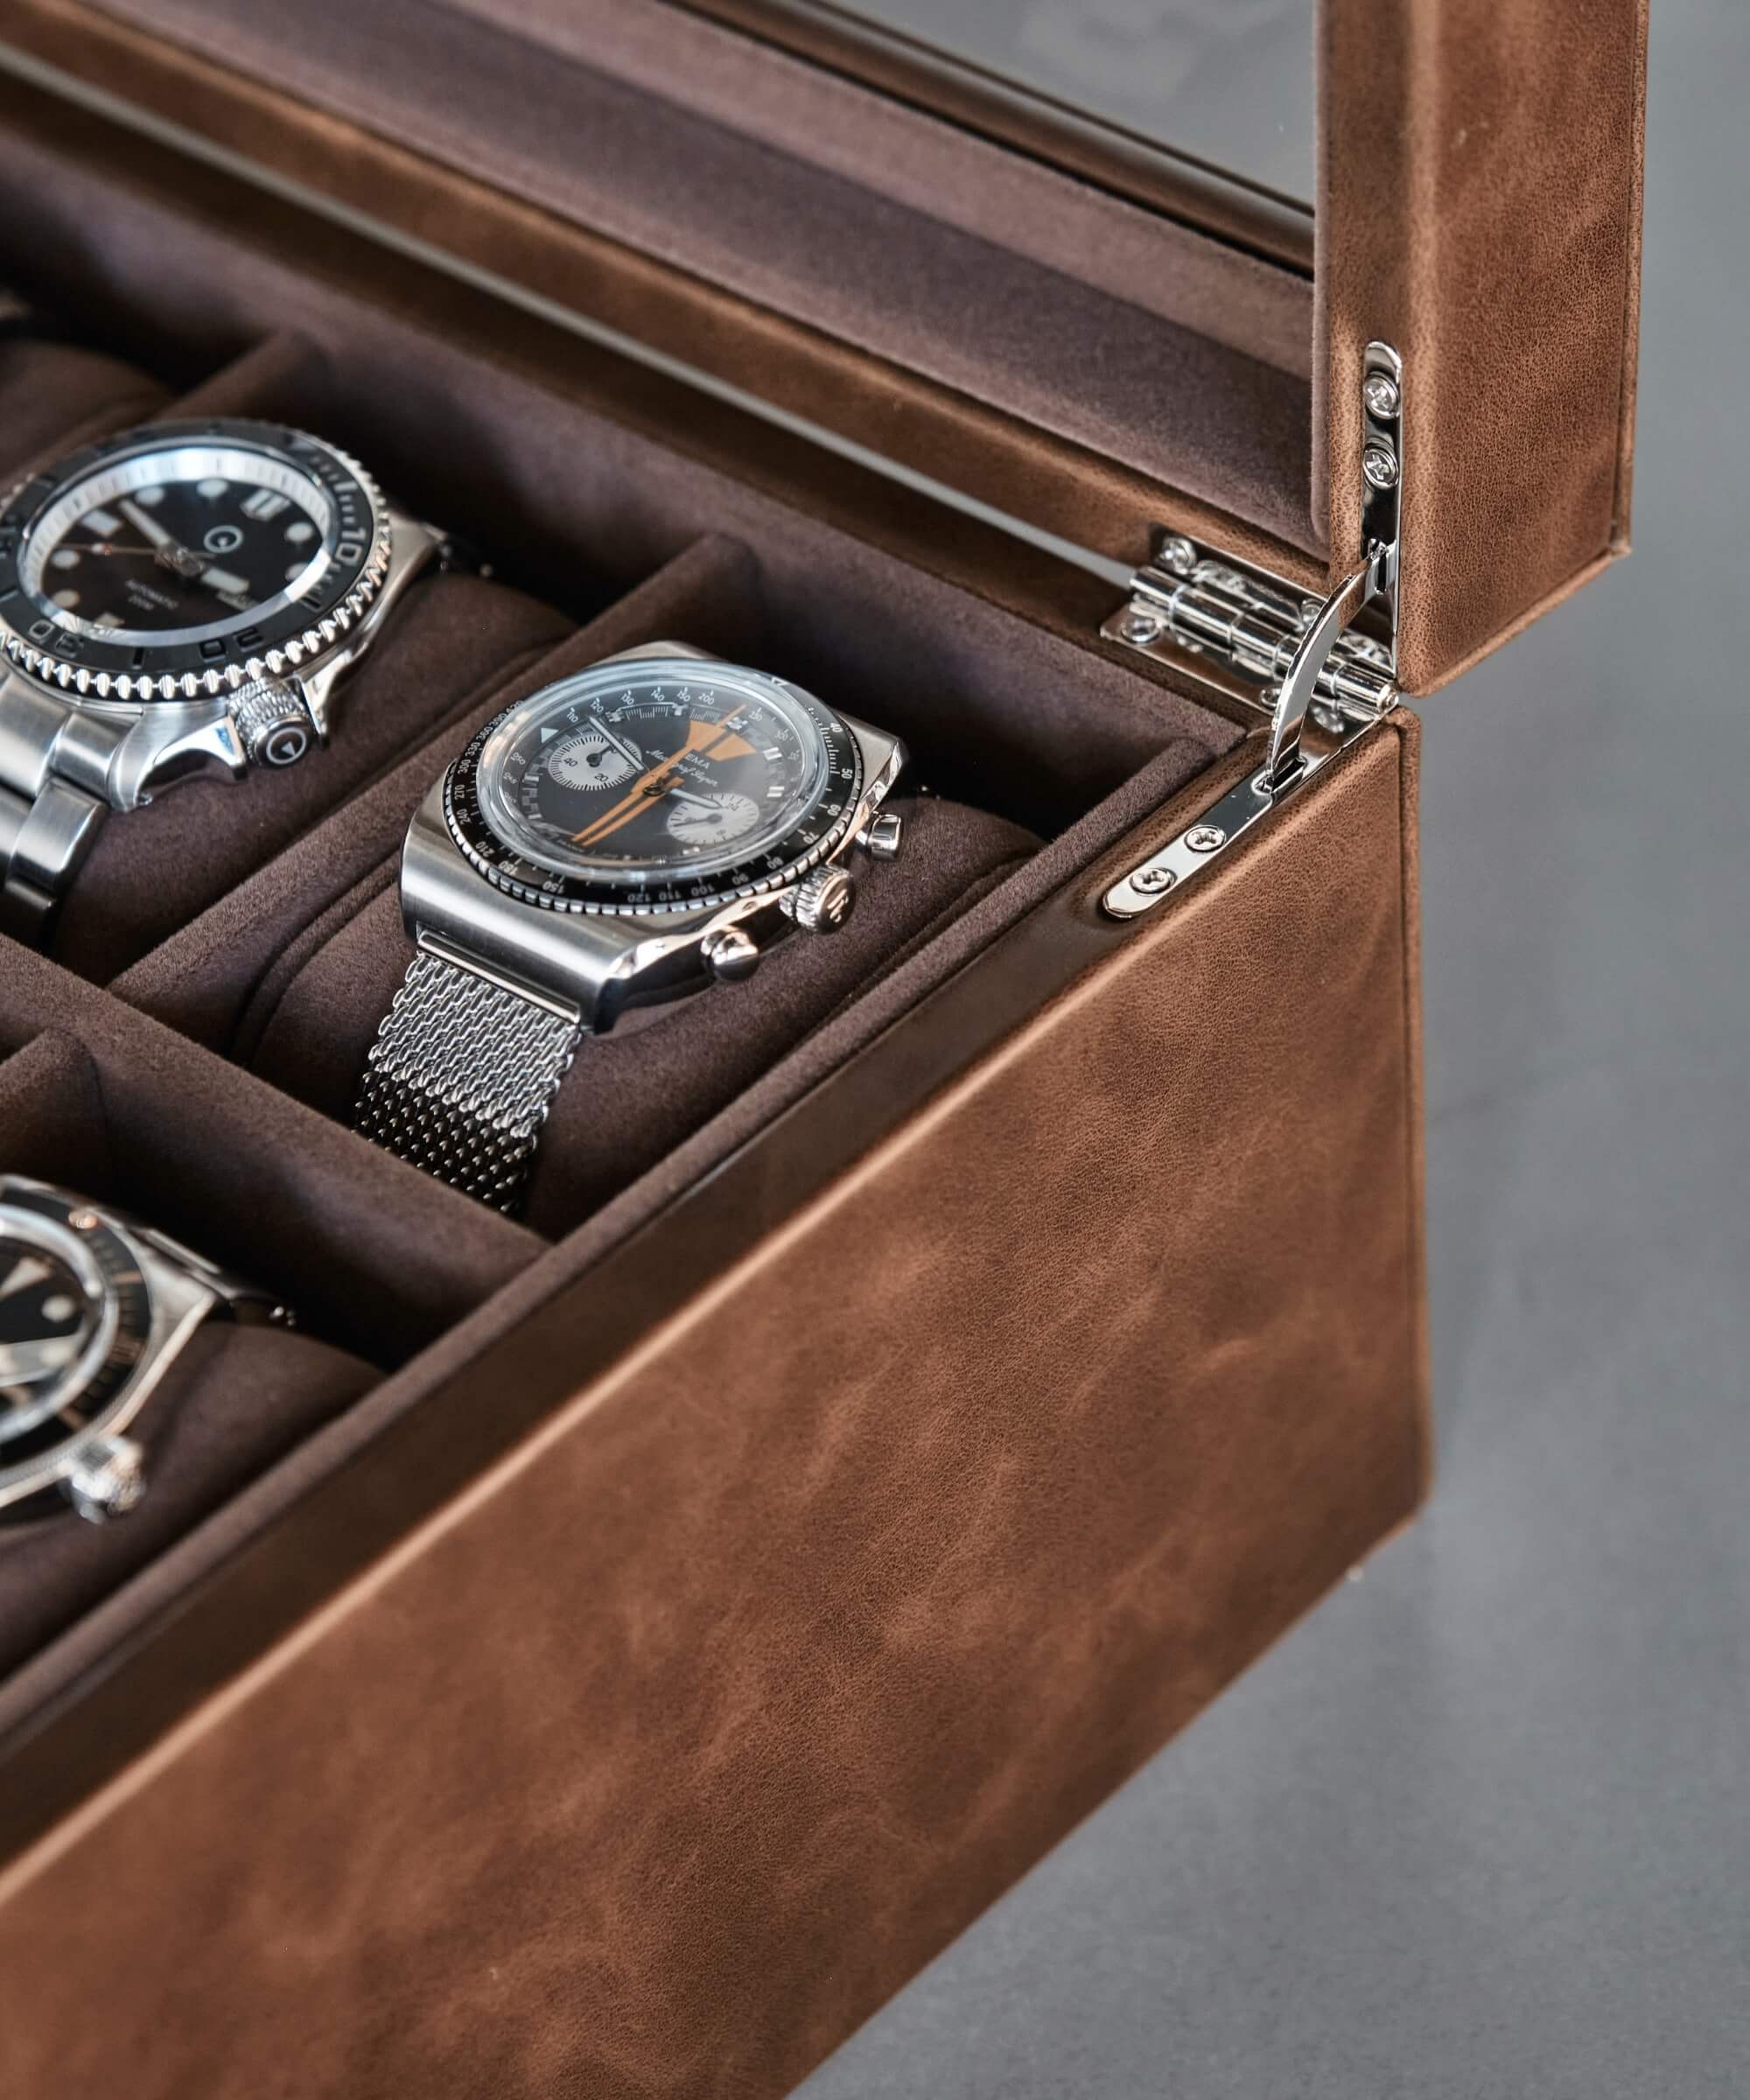 A collection of TAWBURY Bayswater 8 Slot Watch Box with Drawer - Brown in a men's watch case.